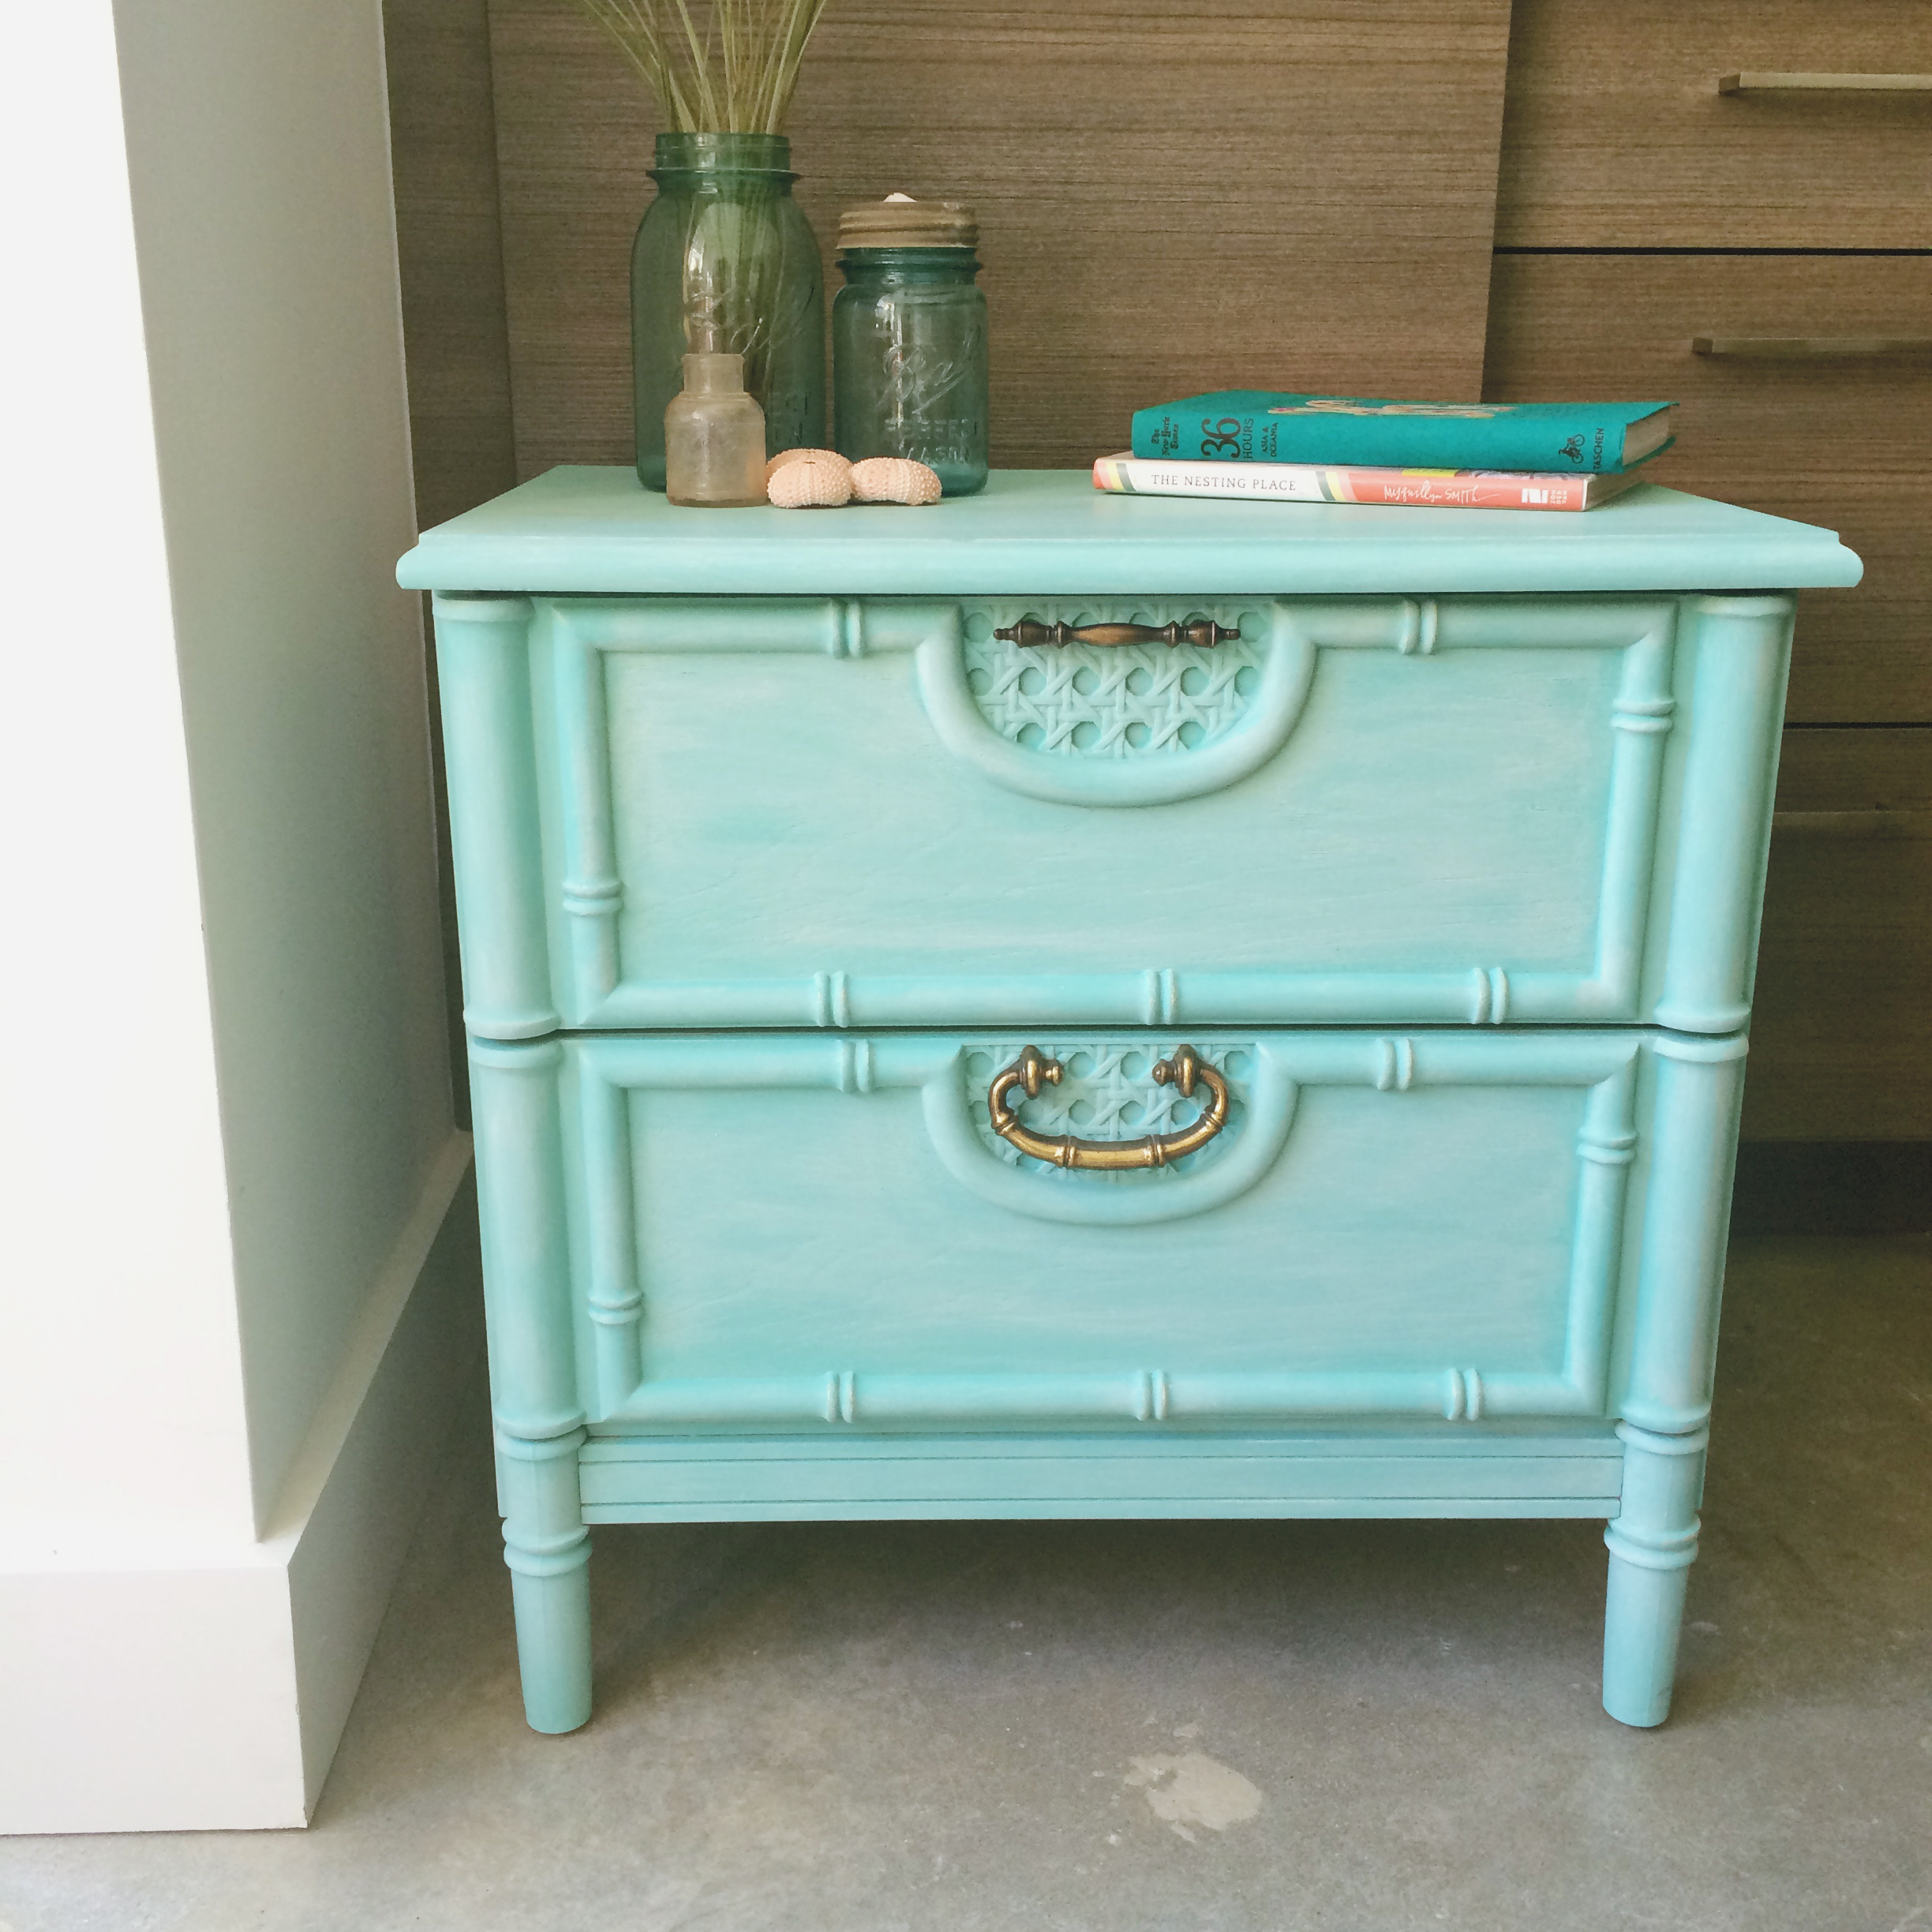 Using White Wax Over Bright Colors Turquoise Nightstand A